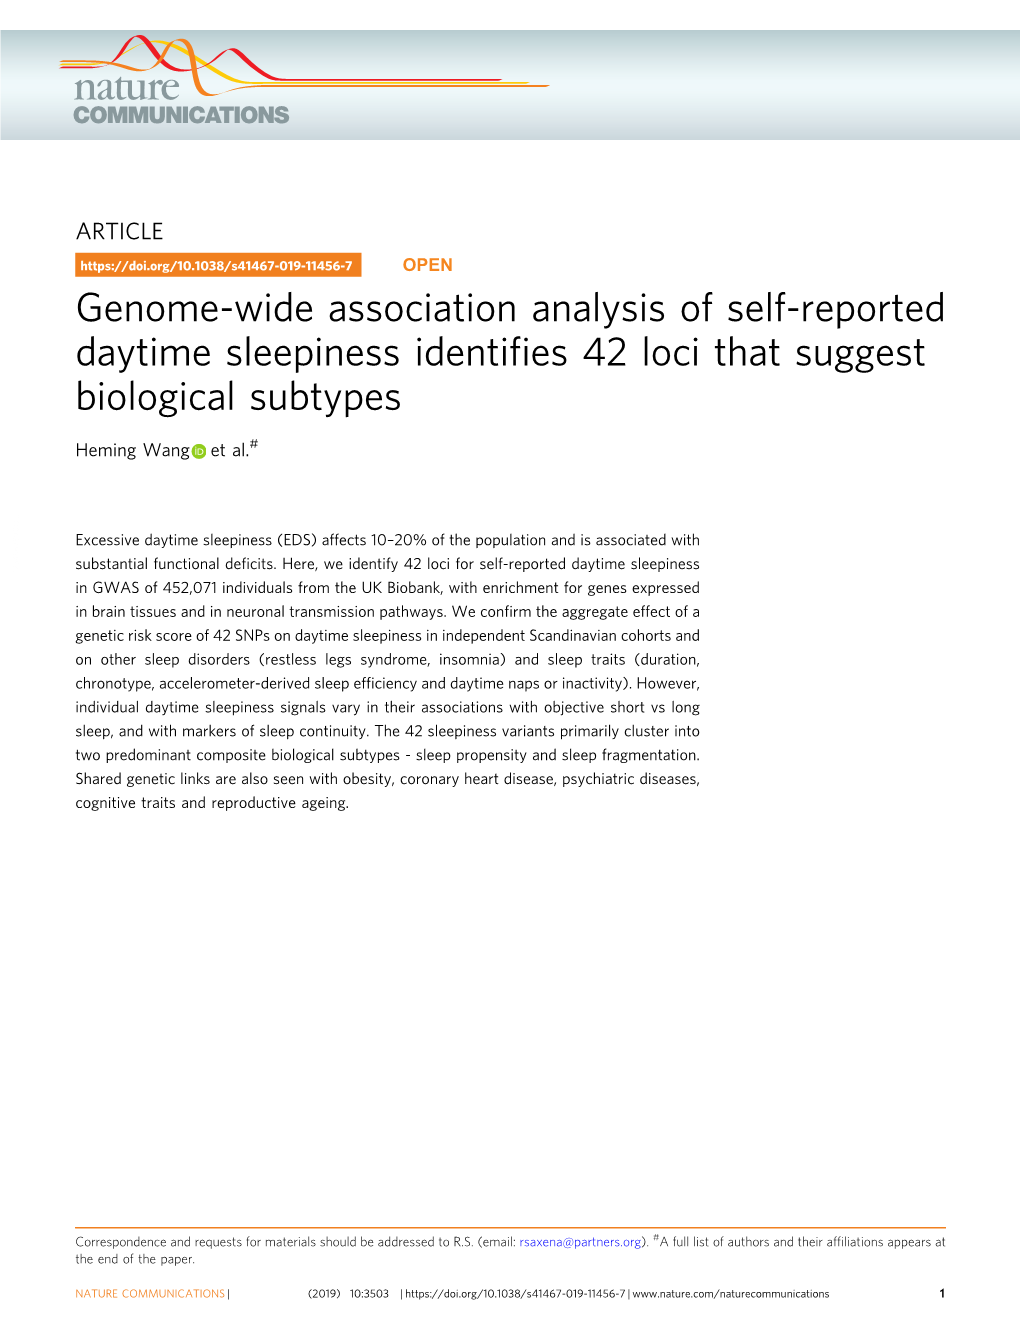 Genome-Wide Association Analysis of Self-Reported Daytime Sleepiness Identiﬁes 42 Loci That Suggest Biological Subtypes